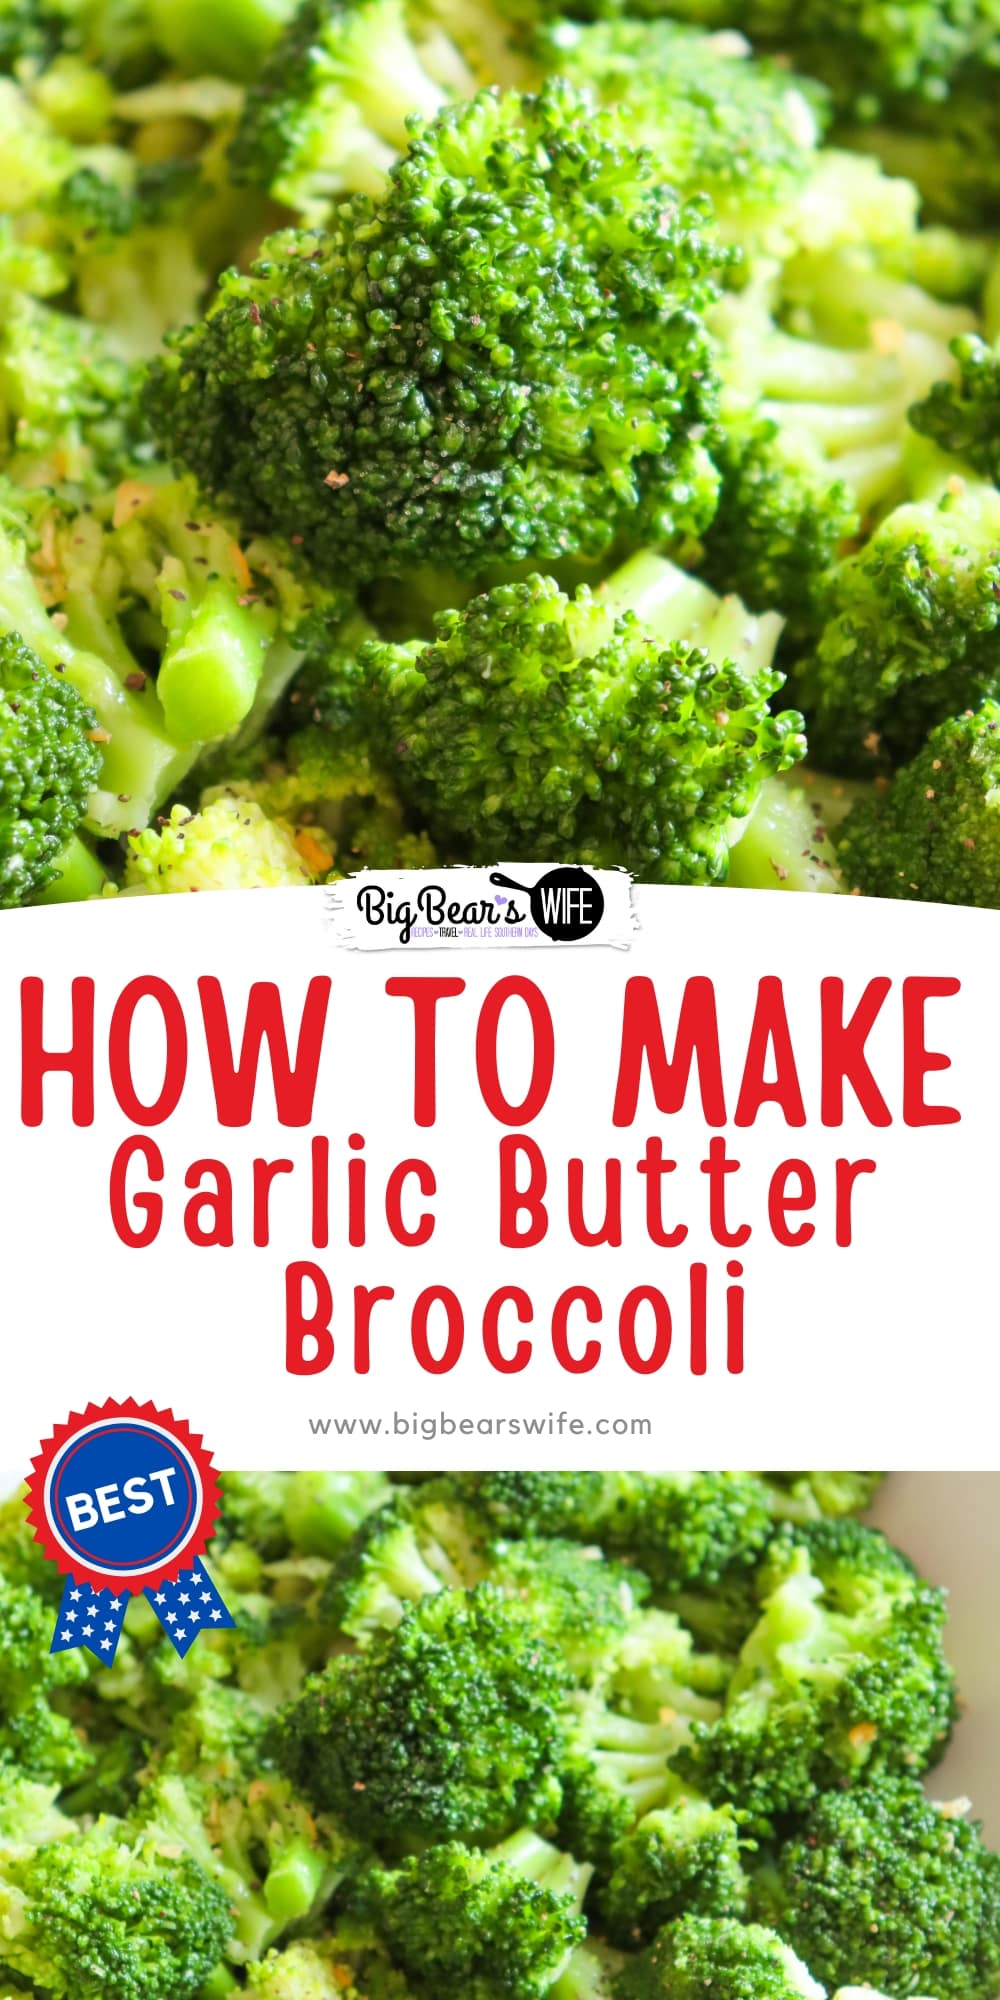 Satisfy your cravings with a tantalizing dish that combines the goodness of broccoli with the heavenly flavors of garlic butter. We'll teach you this simple yet scrumptious recipe that will turn broccoli haters into broccoli lovers. via @bigbearswife